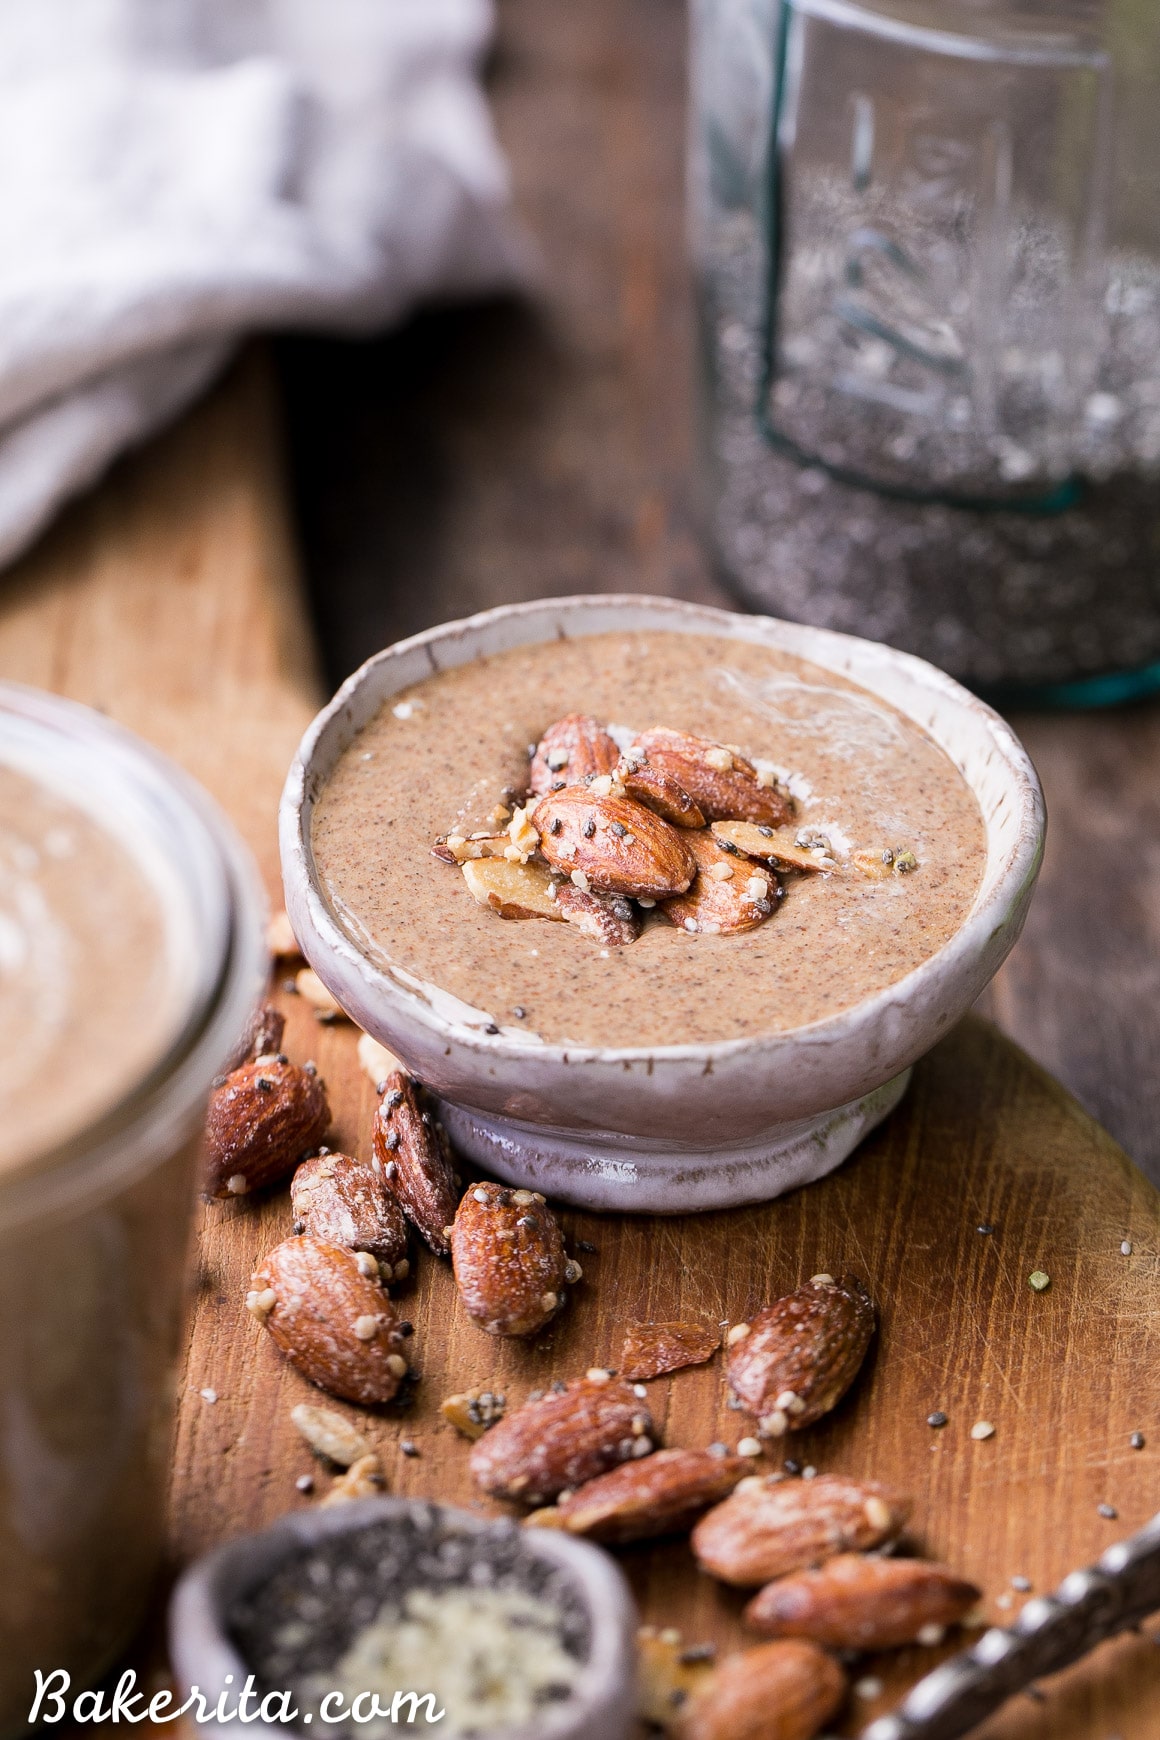 This Maple Almond Butter is made with maple roasted almonds and a hint of vanilla, and made even more nutritious with sunflower seeds, chia seeds, flax seeds, and hemp seeds! You're going to want to spread this almond butter on everything.